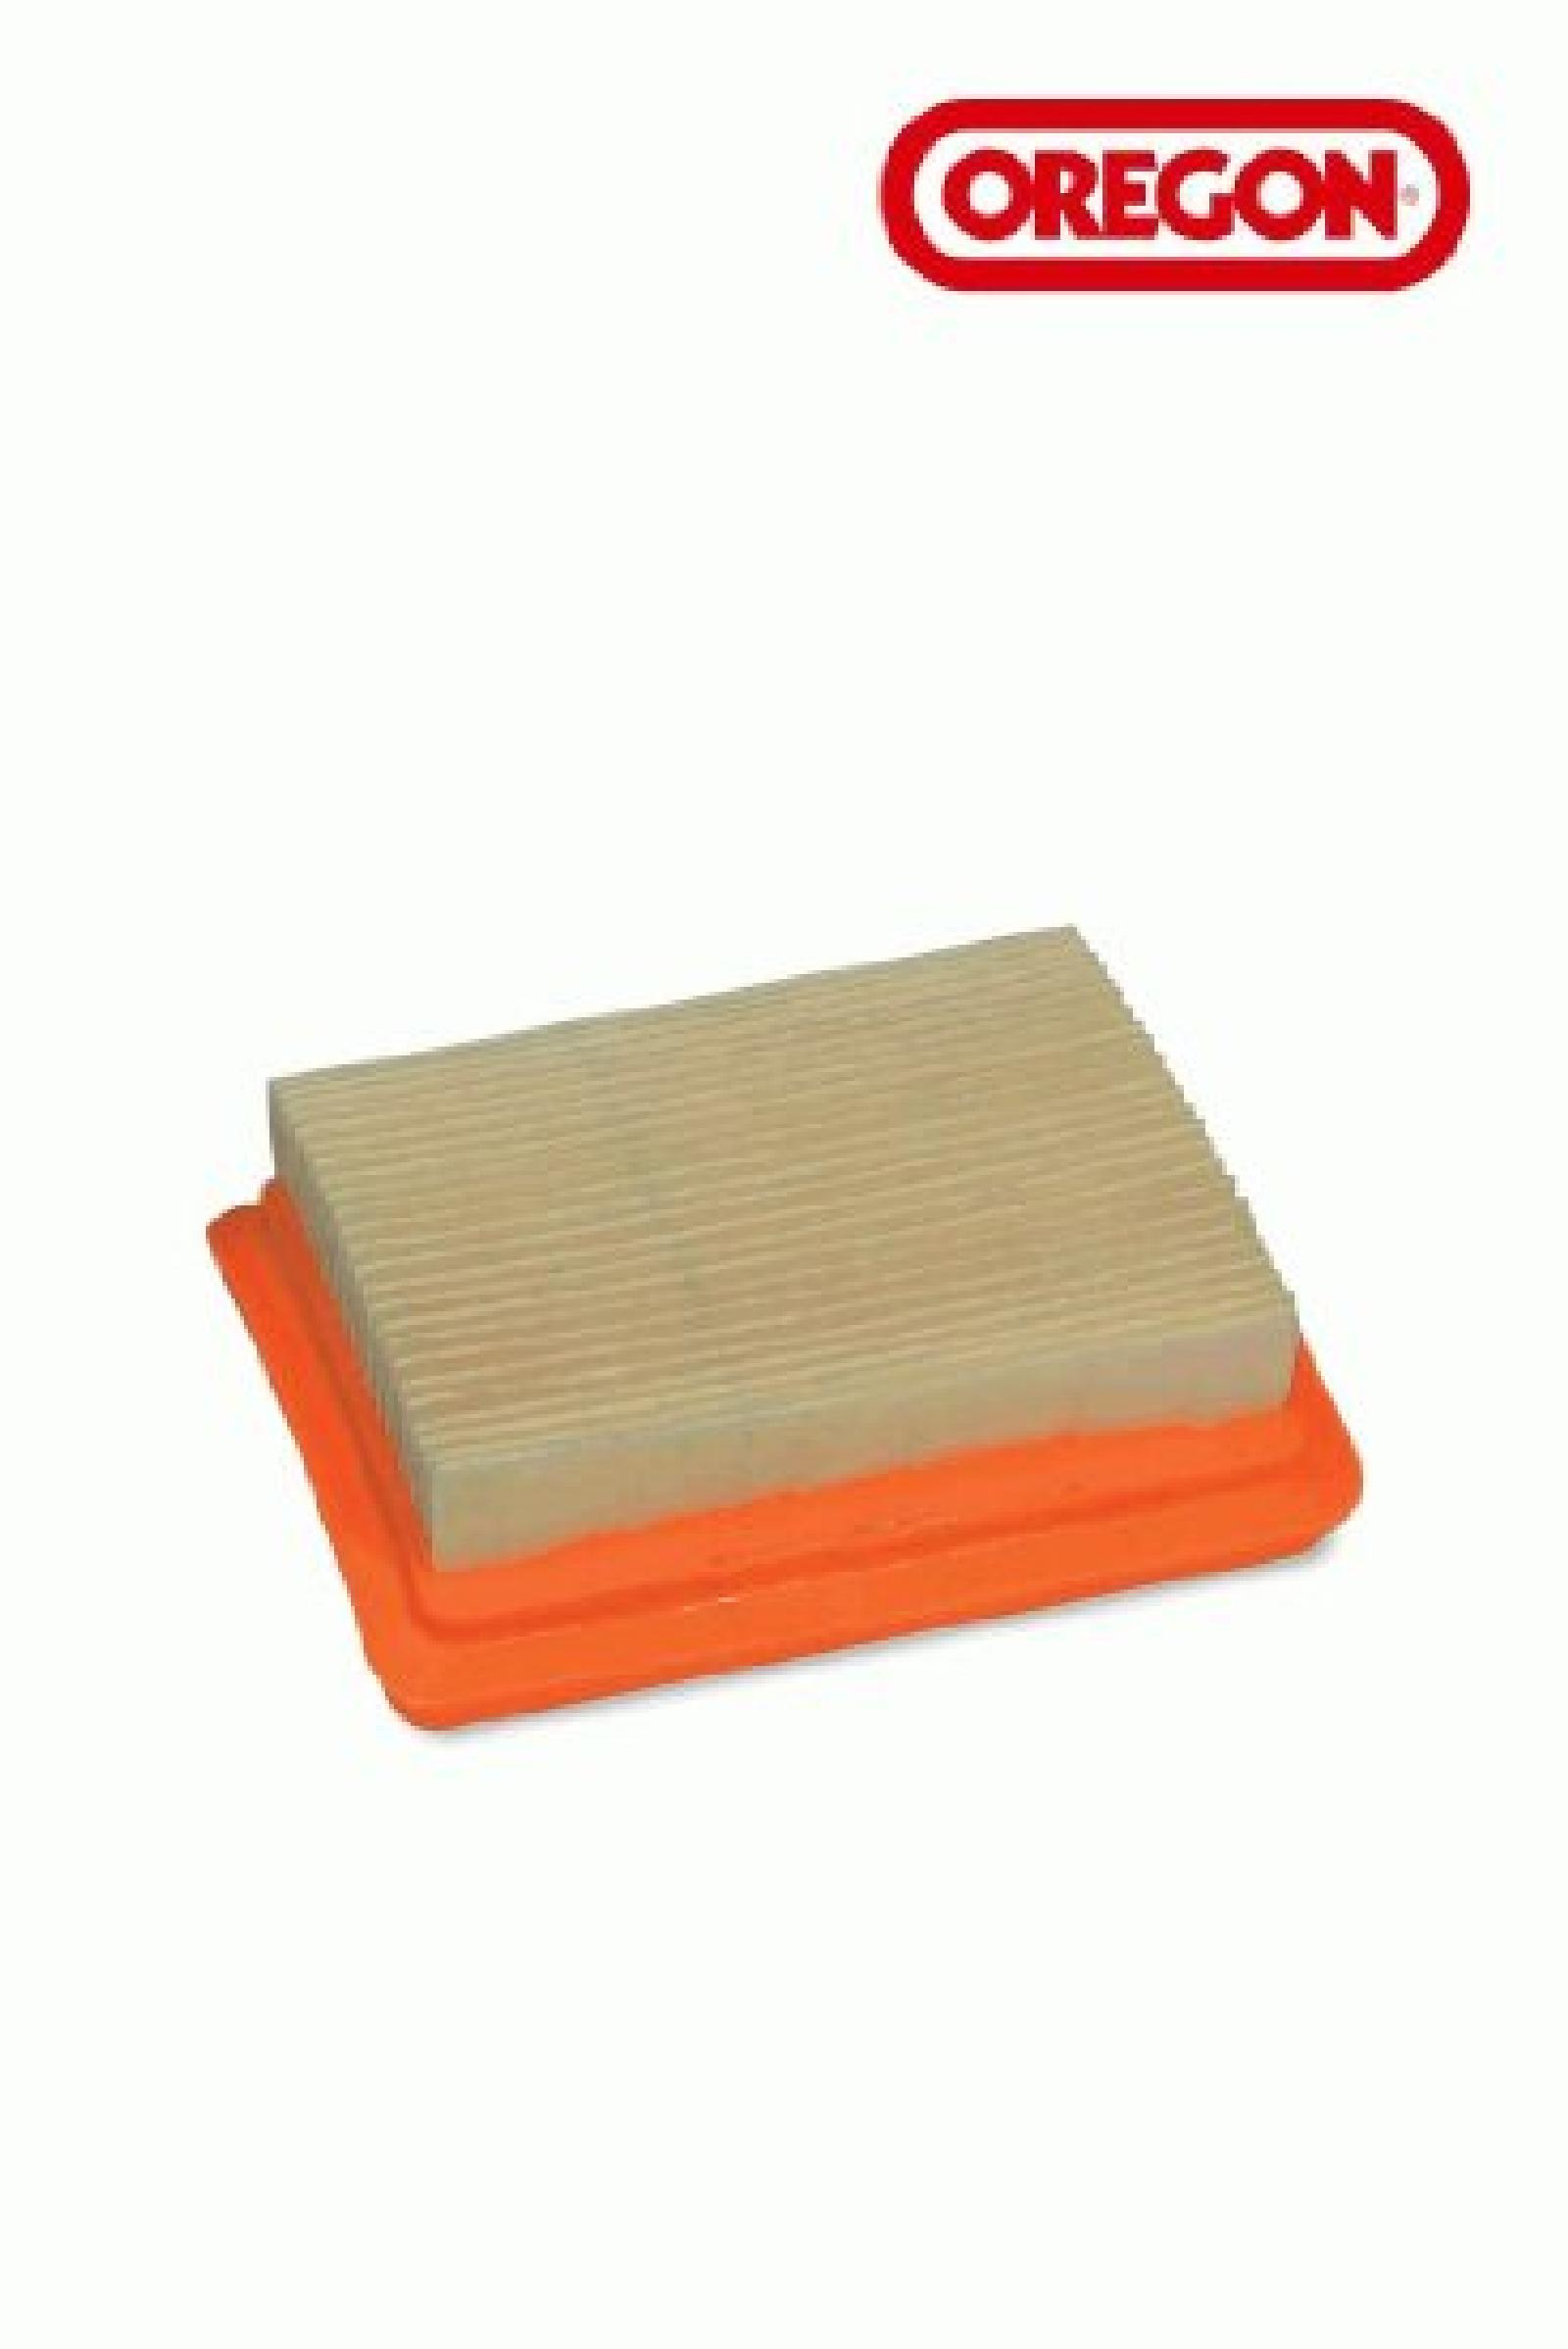 AIR FILTER STIHL part# 55-079 by Oregon - Click Image to Close